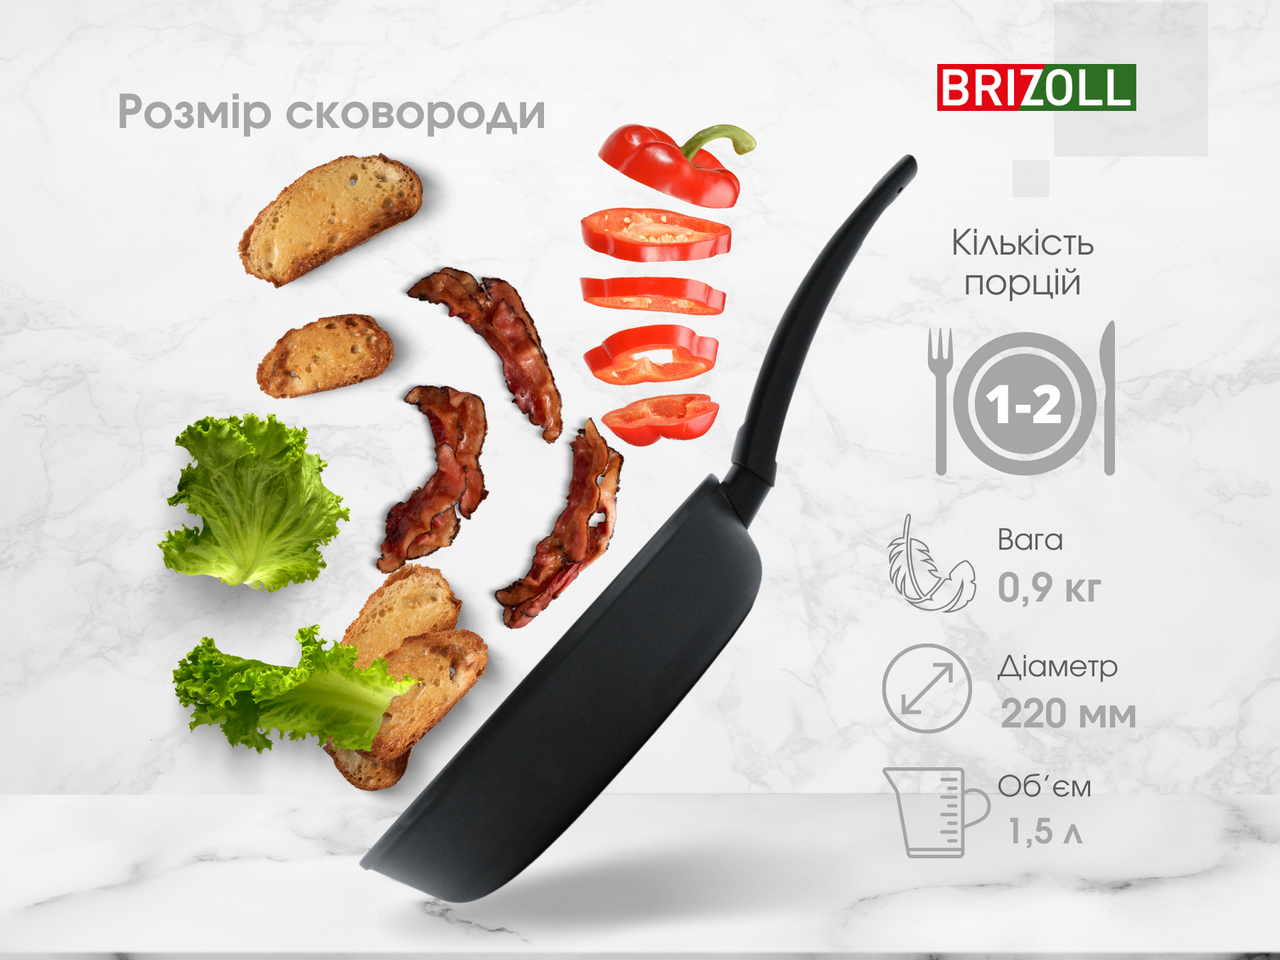 Frying pan 22 sm with non-stick coating SKY